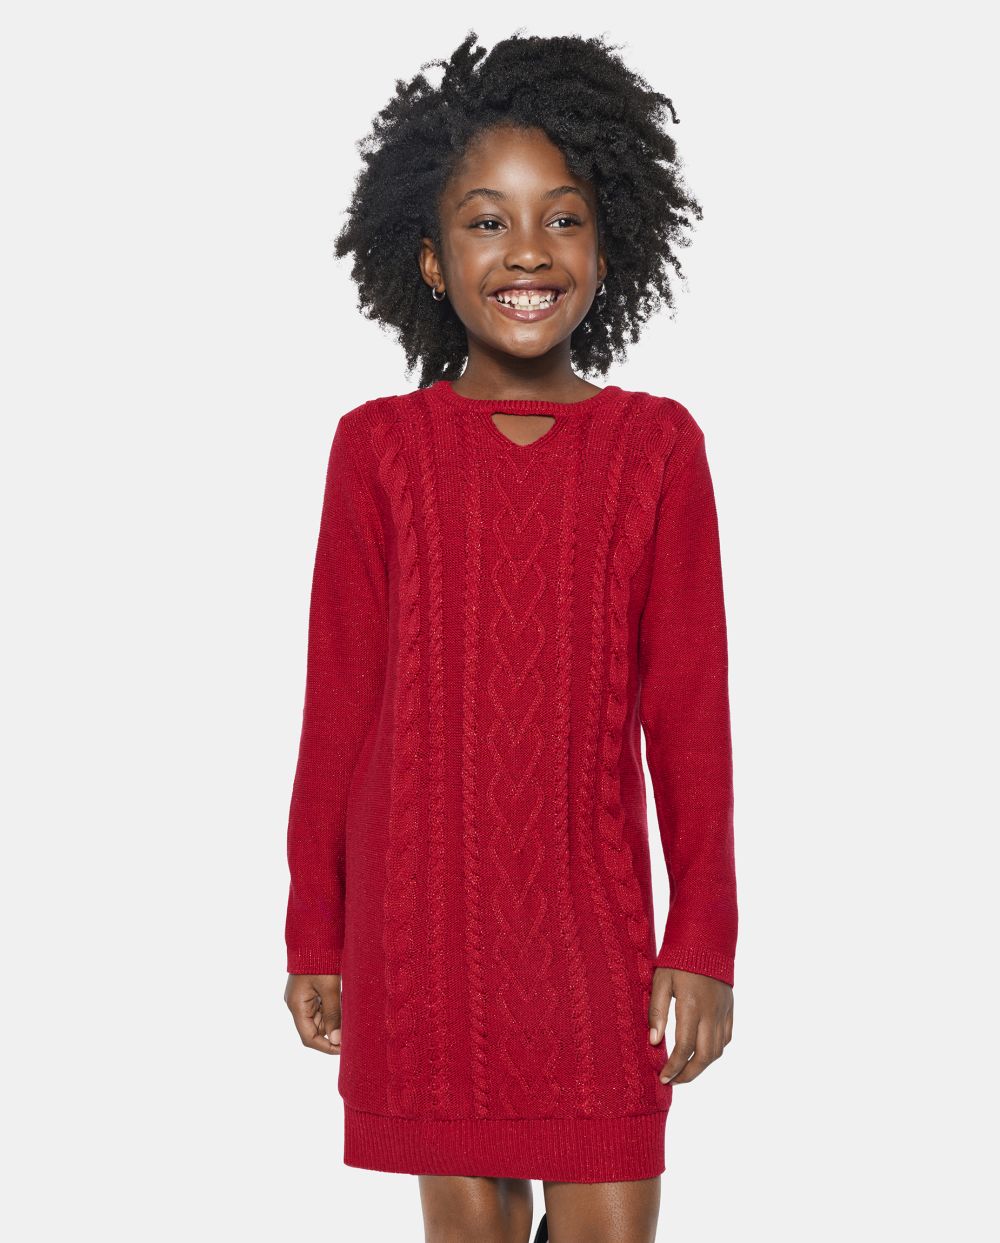 Girls Sweater Above the Knee Cutout Crew Neck Long Sleeves Dress